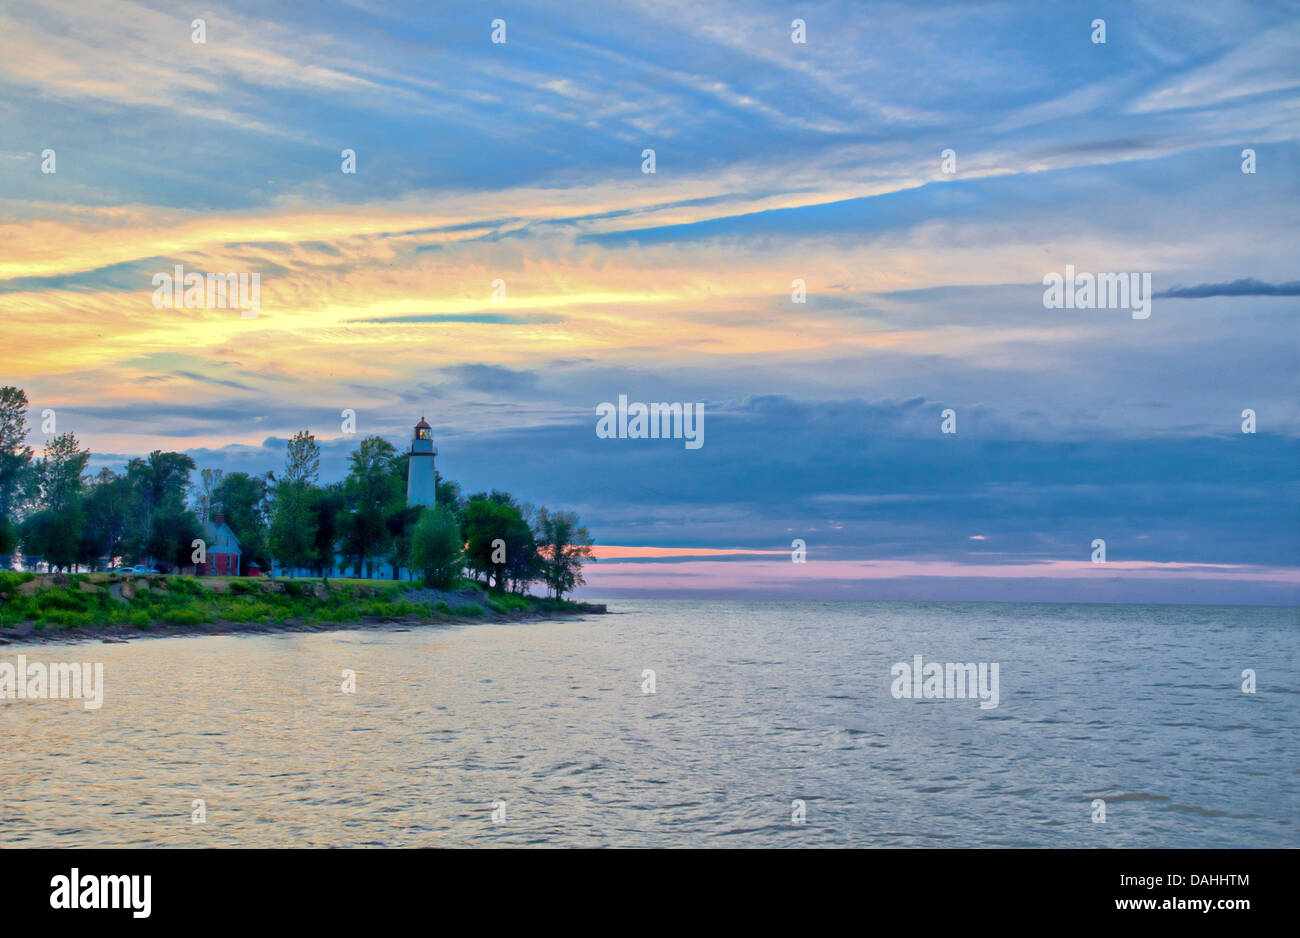 Lighthouse on the horizon with sunset sky in the background. Stock Photo